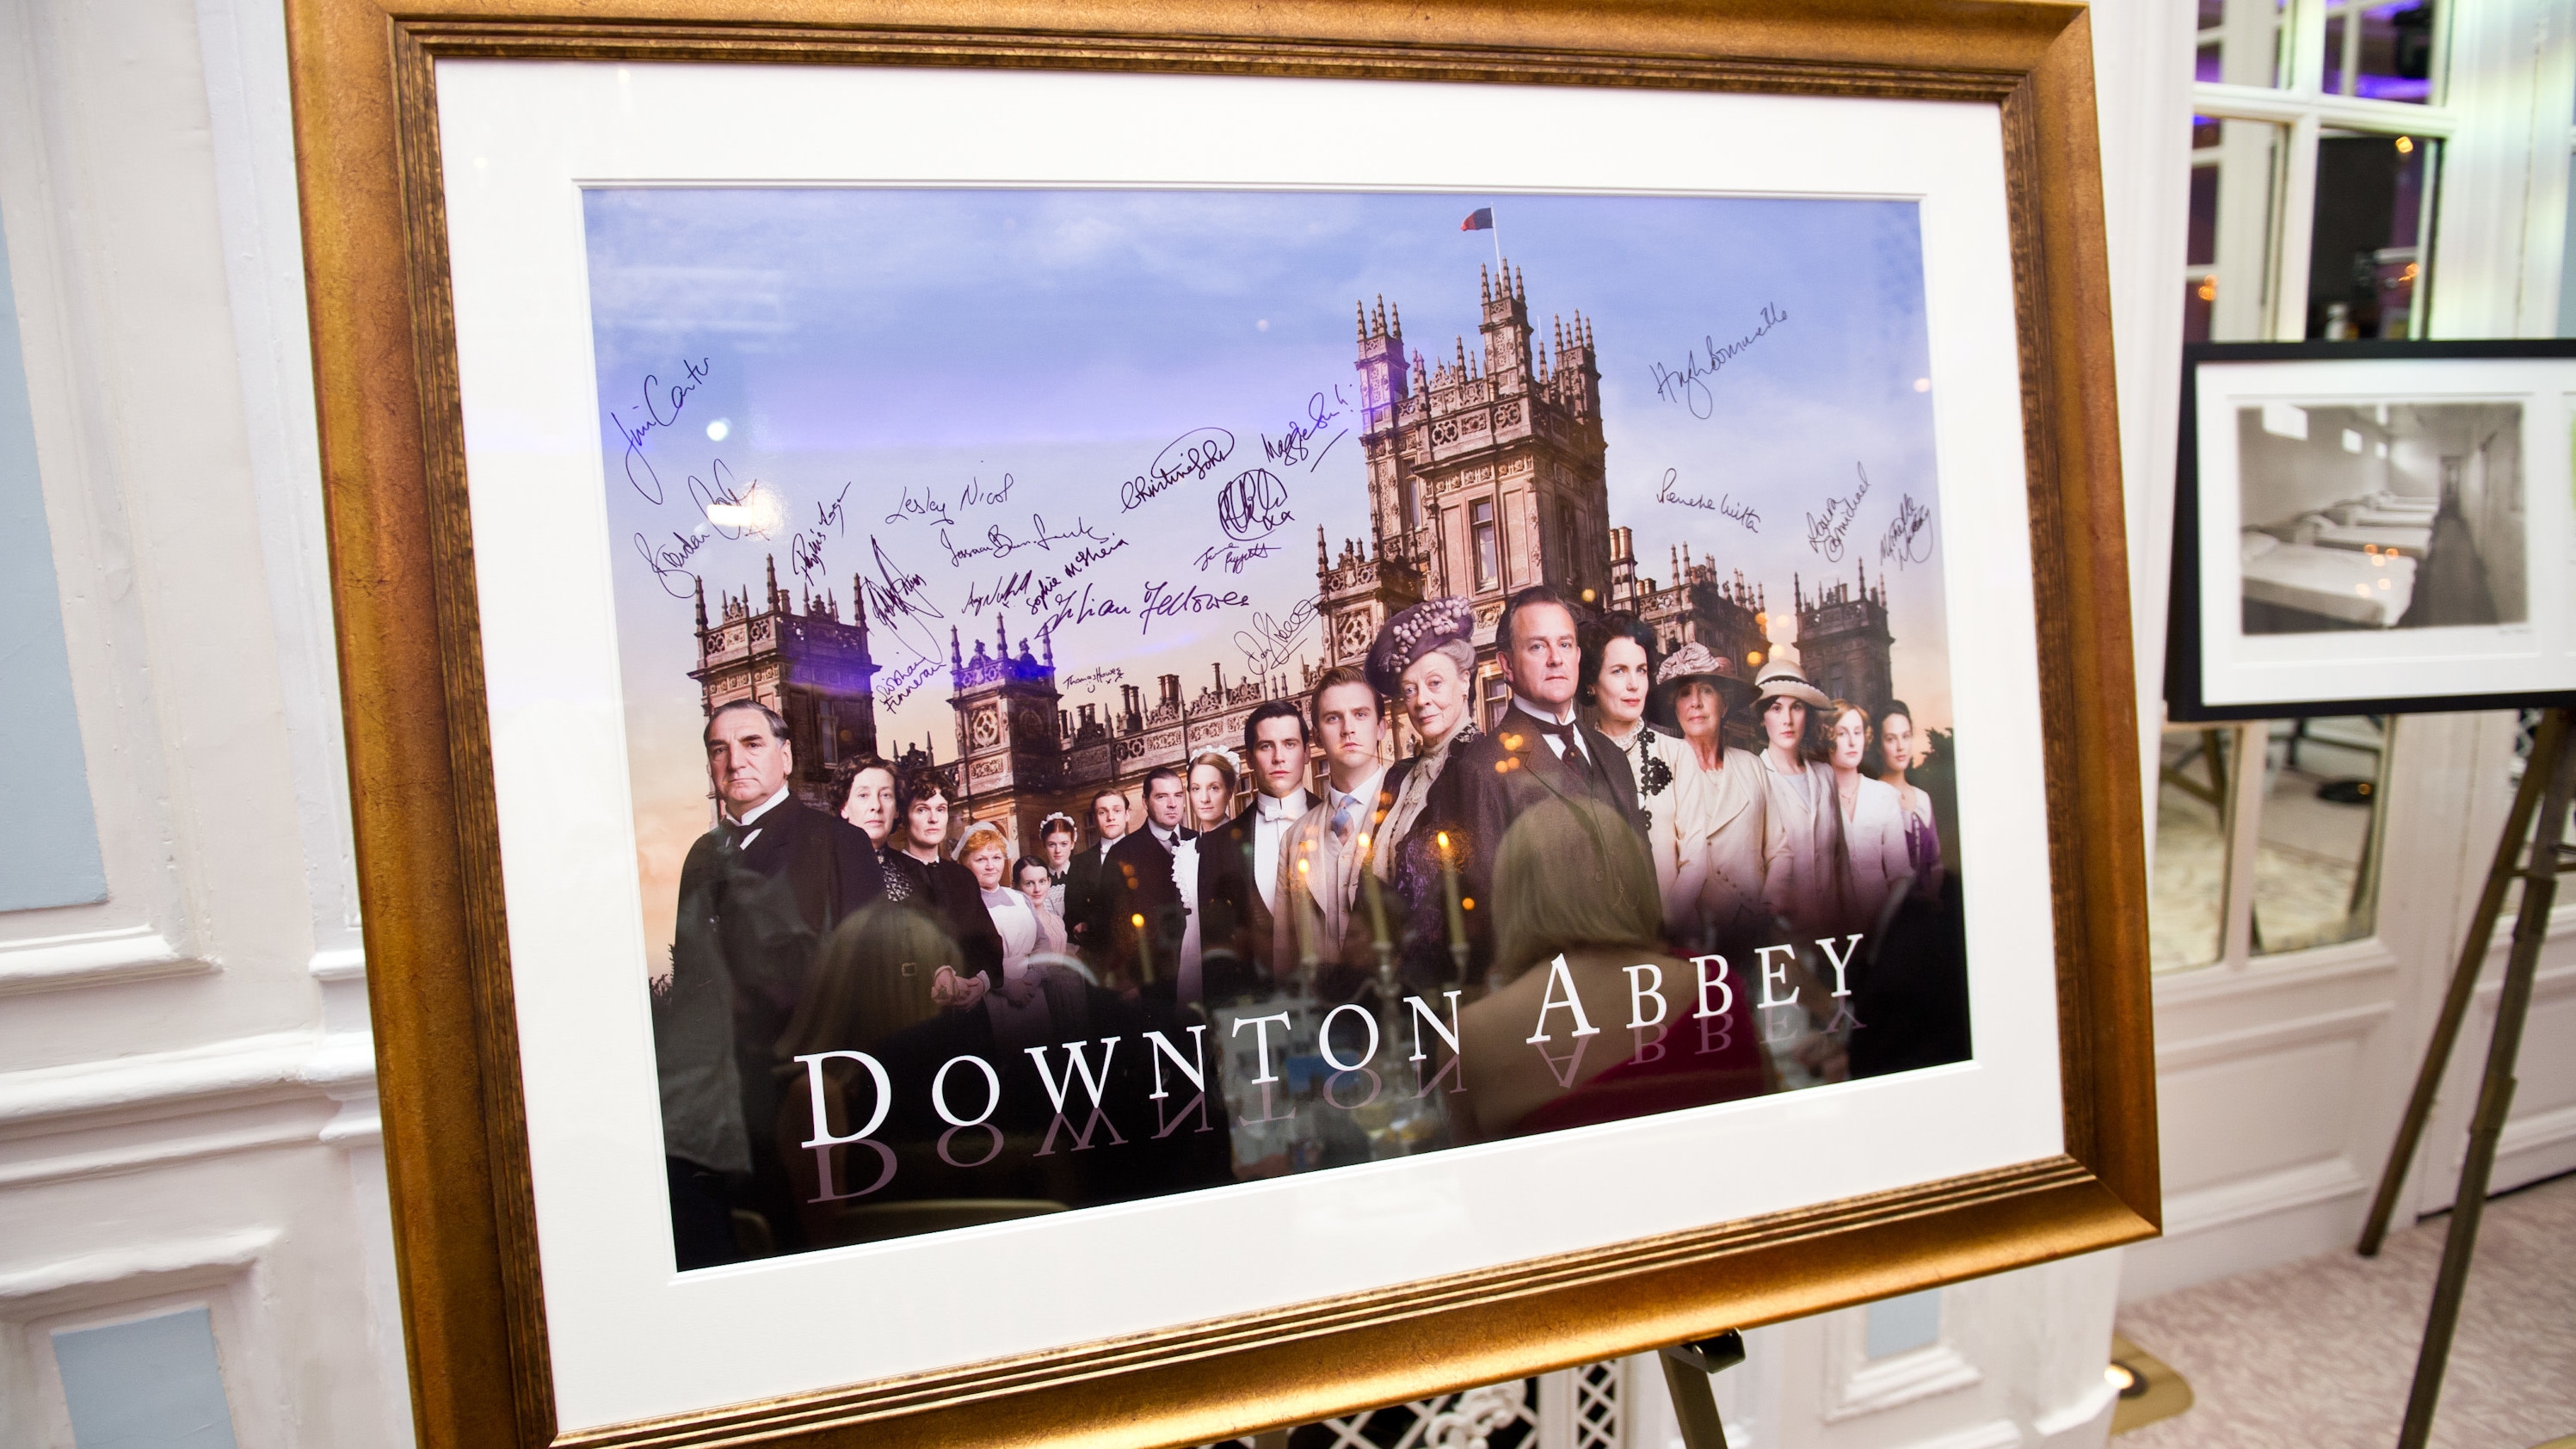 Downton Abbey 2 is happening, will race in to theaters this Christmas